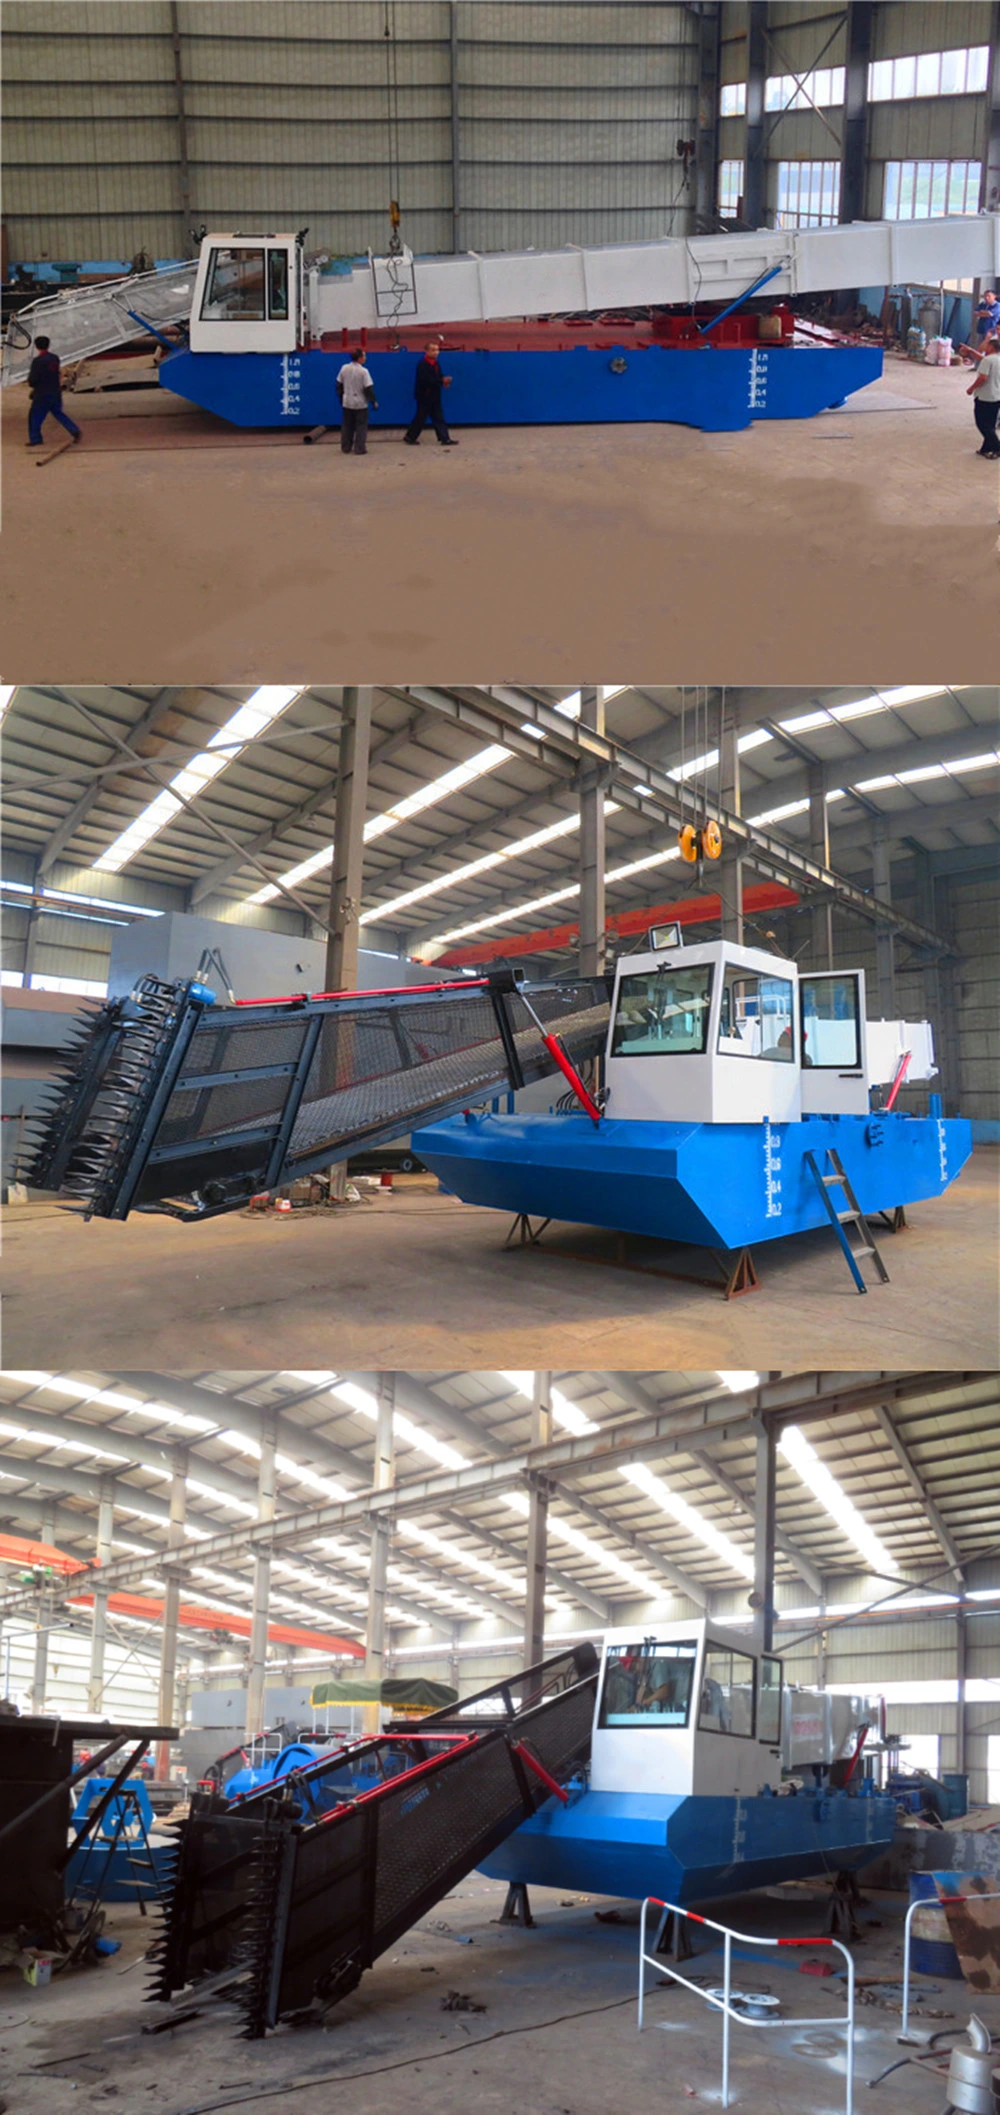 River Water Surface Cleaning Vessel, Lake Garbage Collection Vessel Harvester